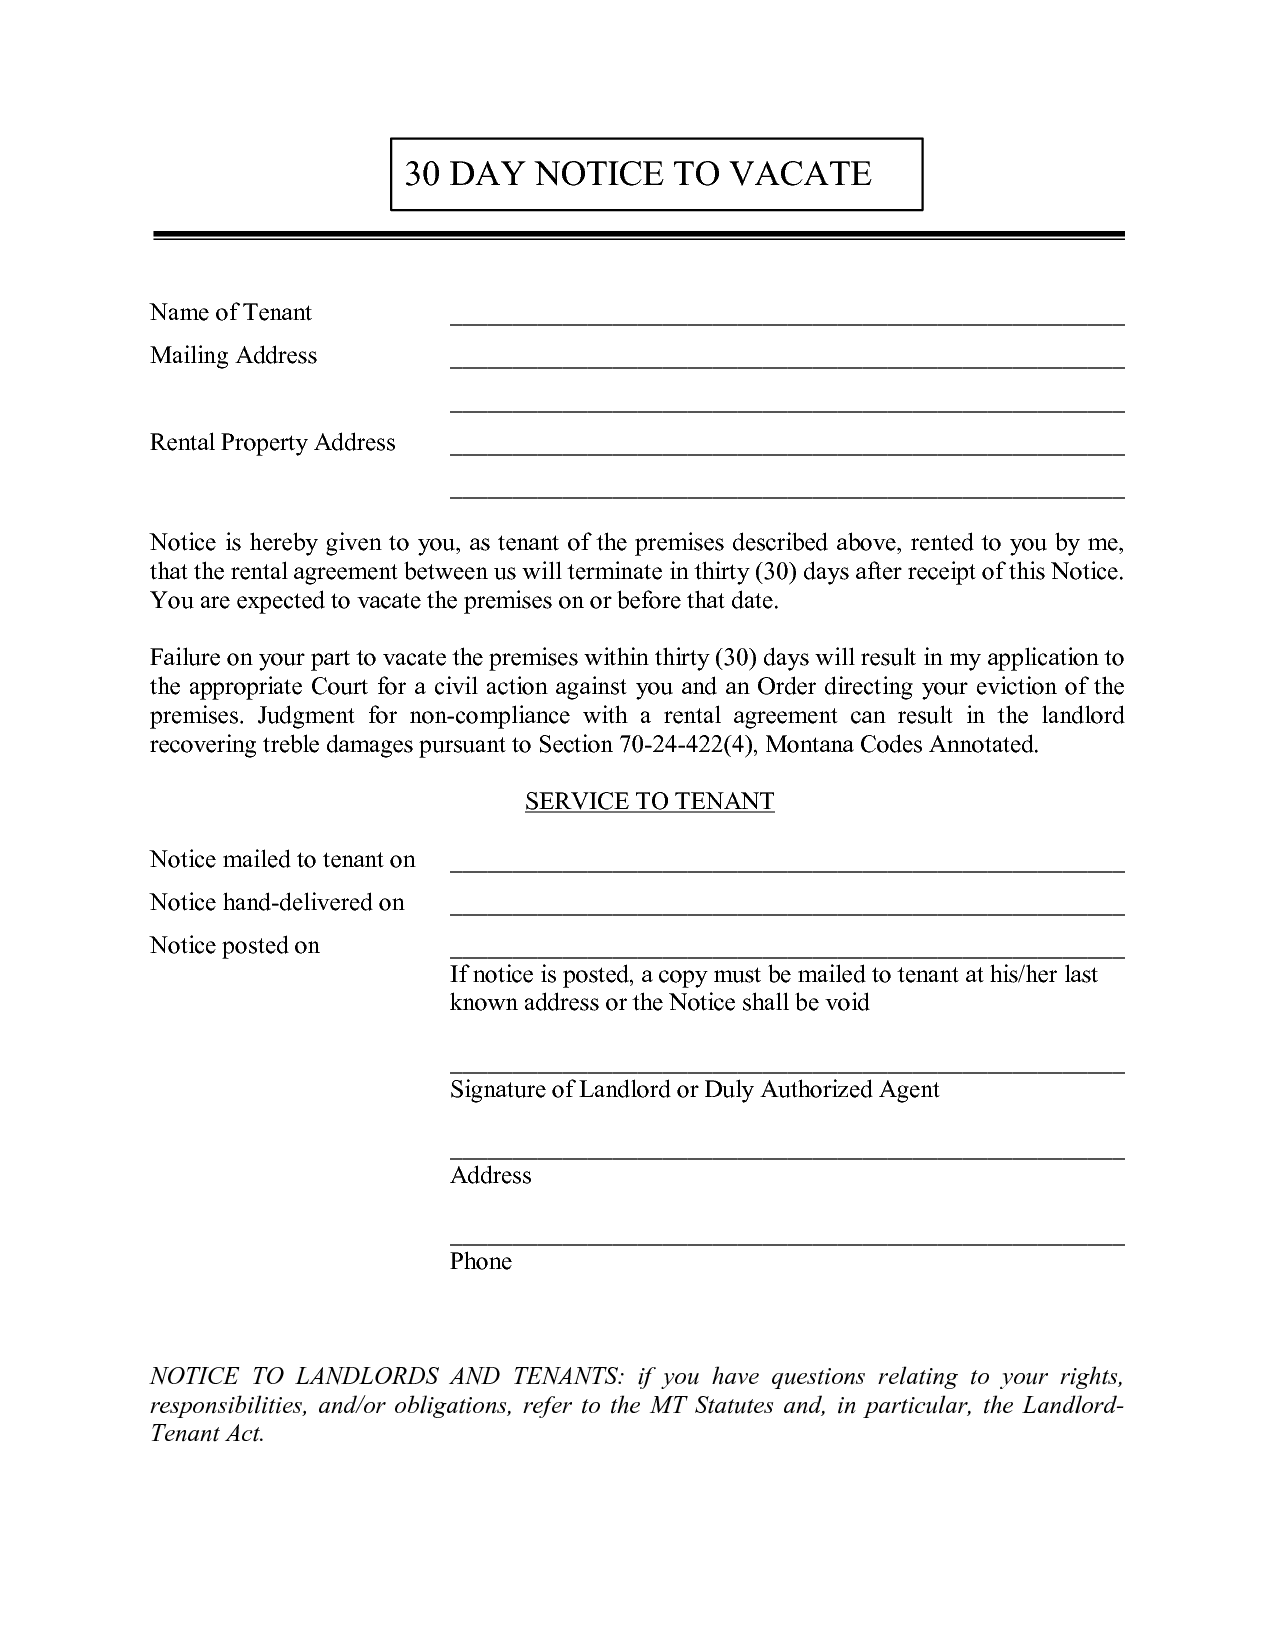 Printable 30 Day Notice To Vacate